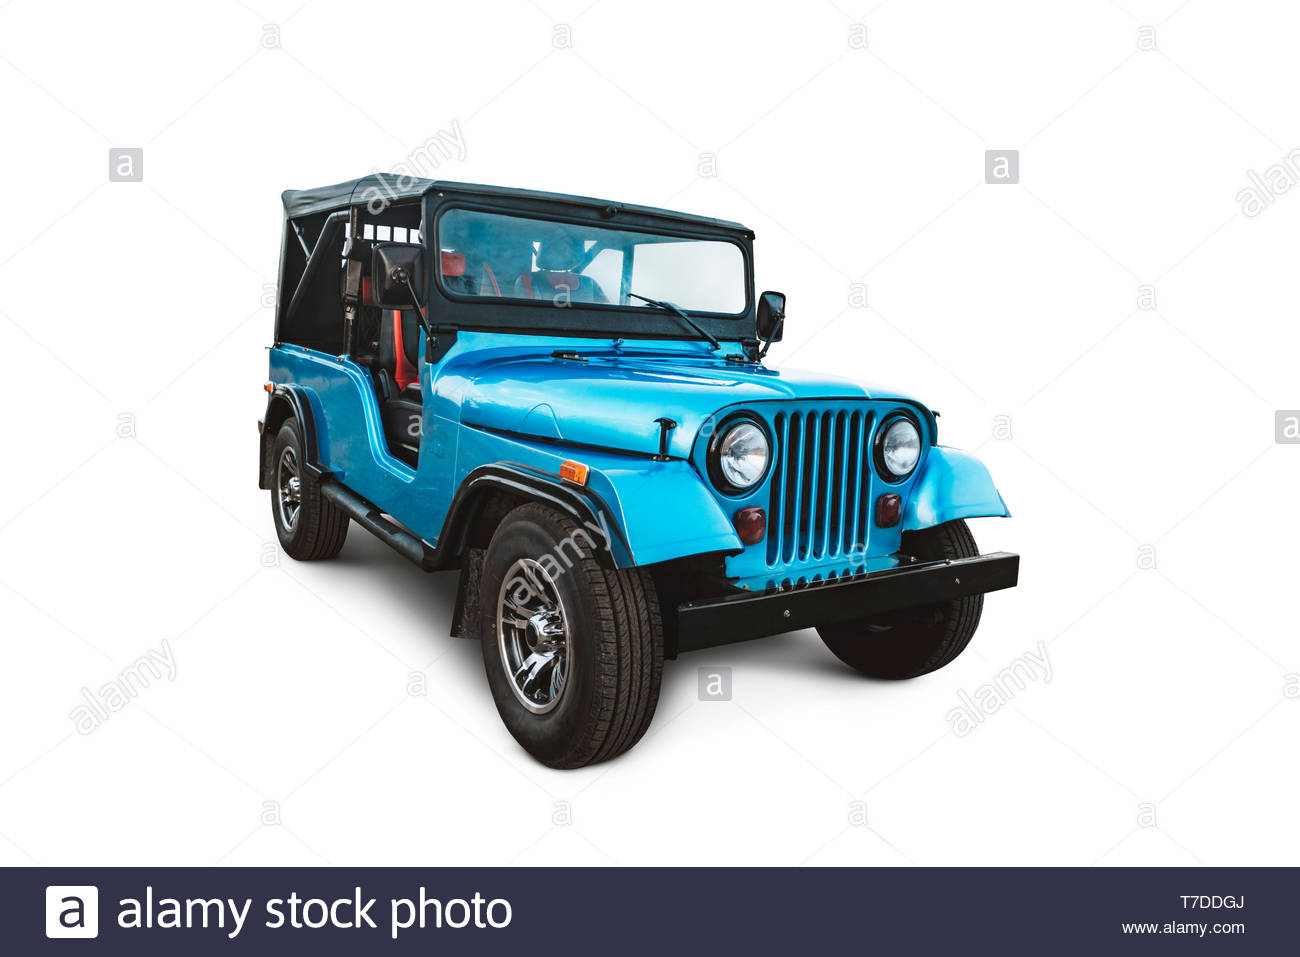 Old Retro Suv Car Blue Color Isolated On White Background